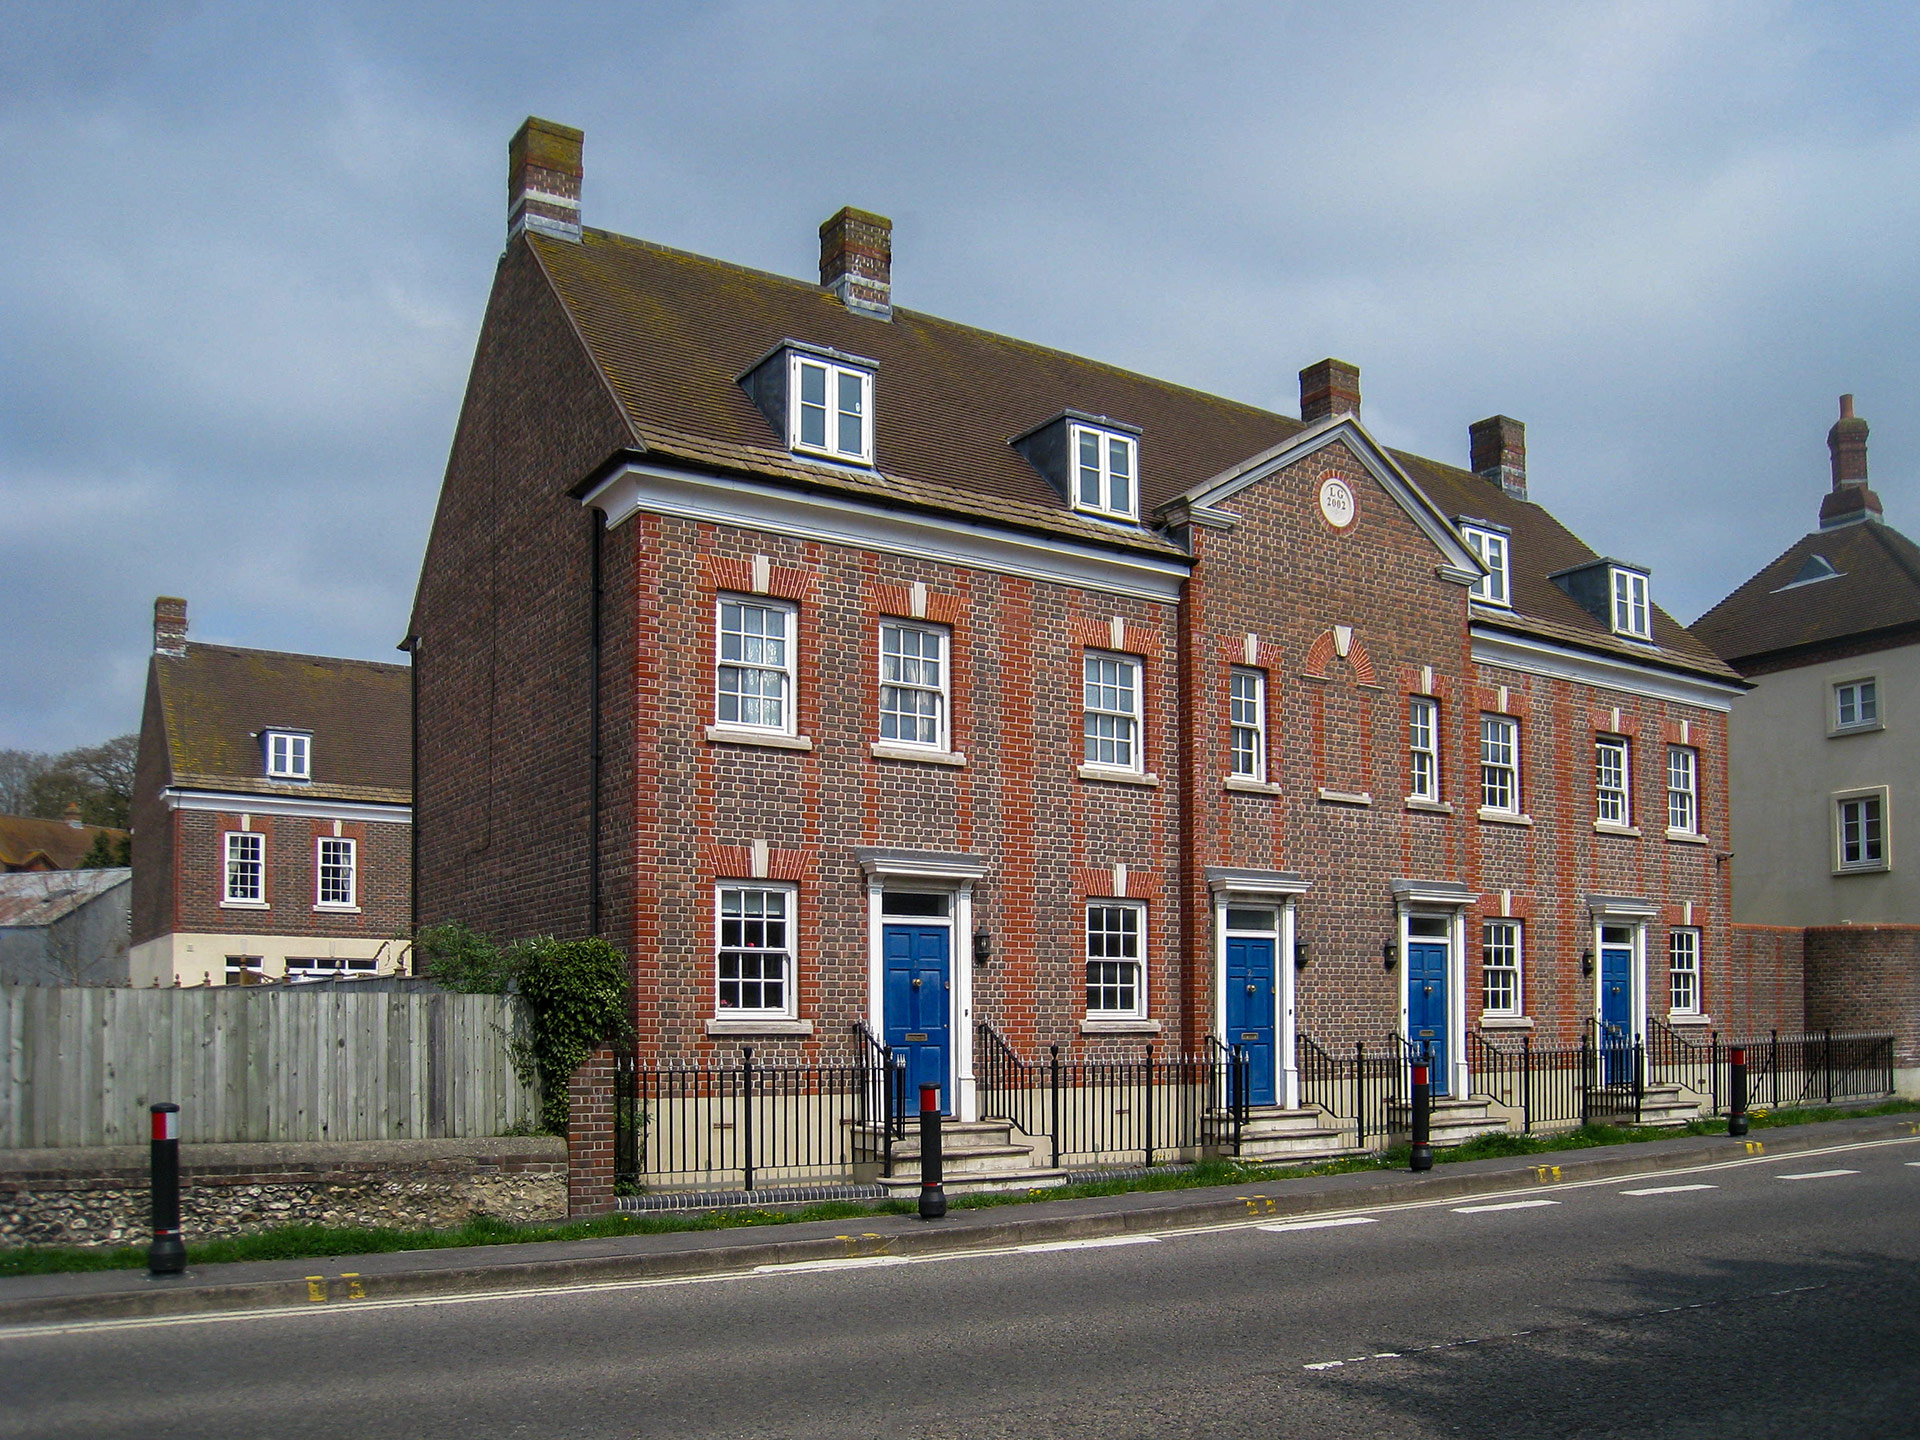 front view of terraced red brick houses from across road